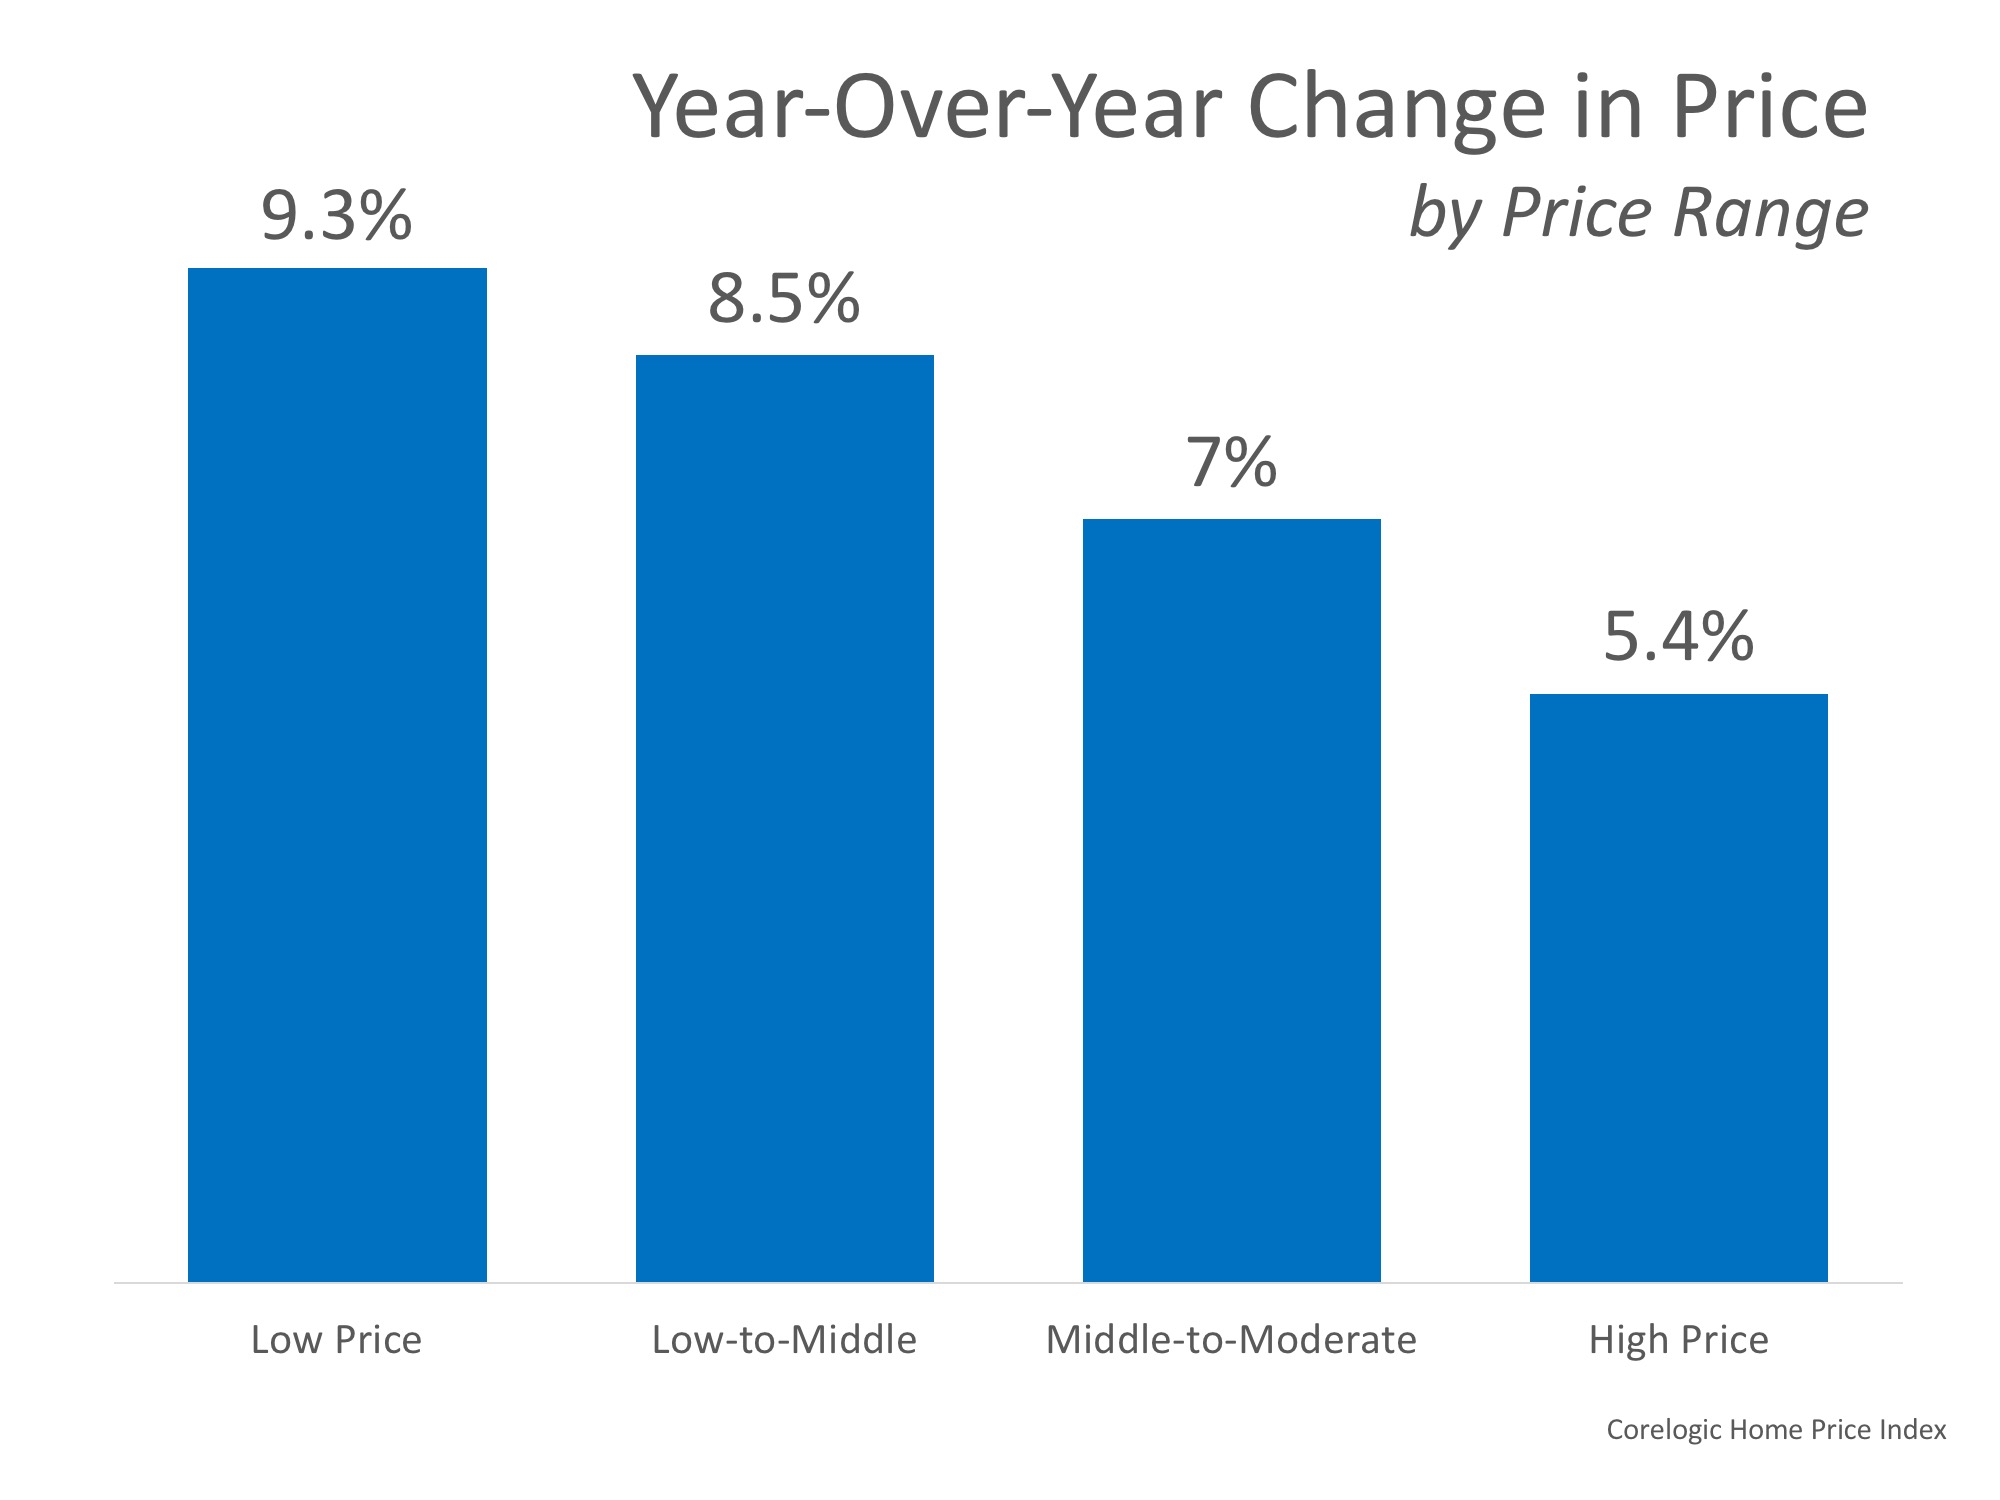 How Much Has Your Home Increased in Value Over the Last Year? | Simplifying The Market